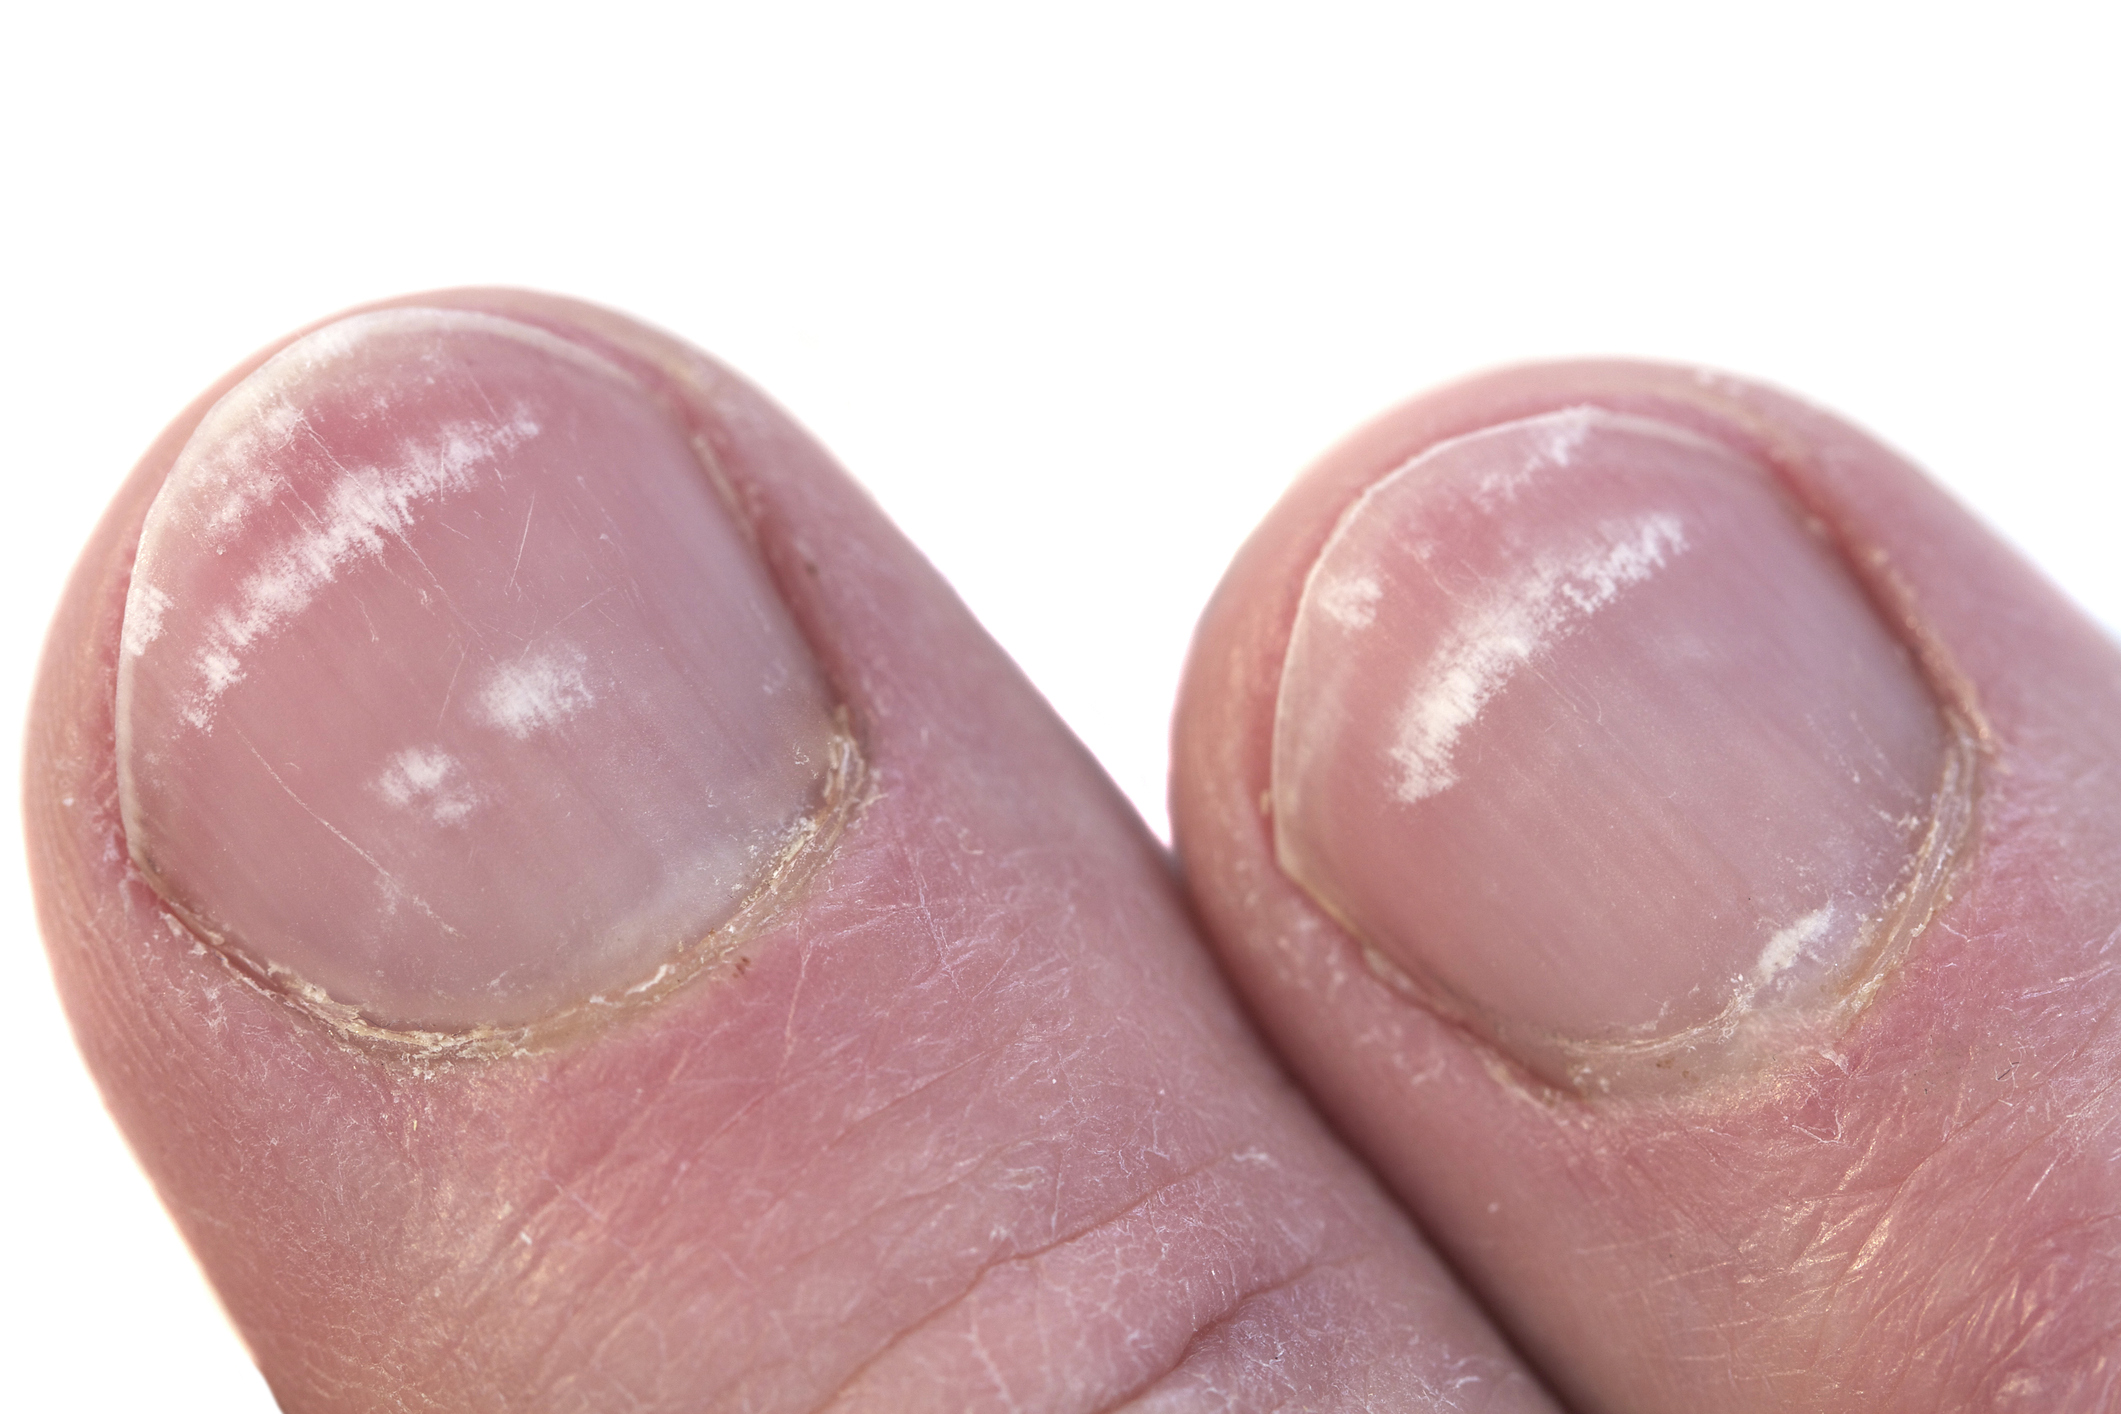 Find Out What to Eat to Increase Overall Health and General Well-Being of  Your Nails